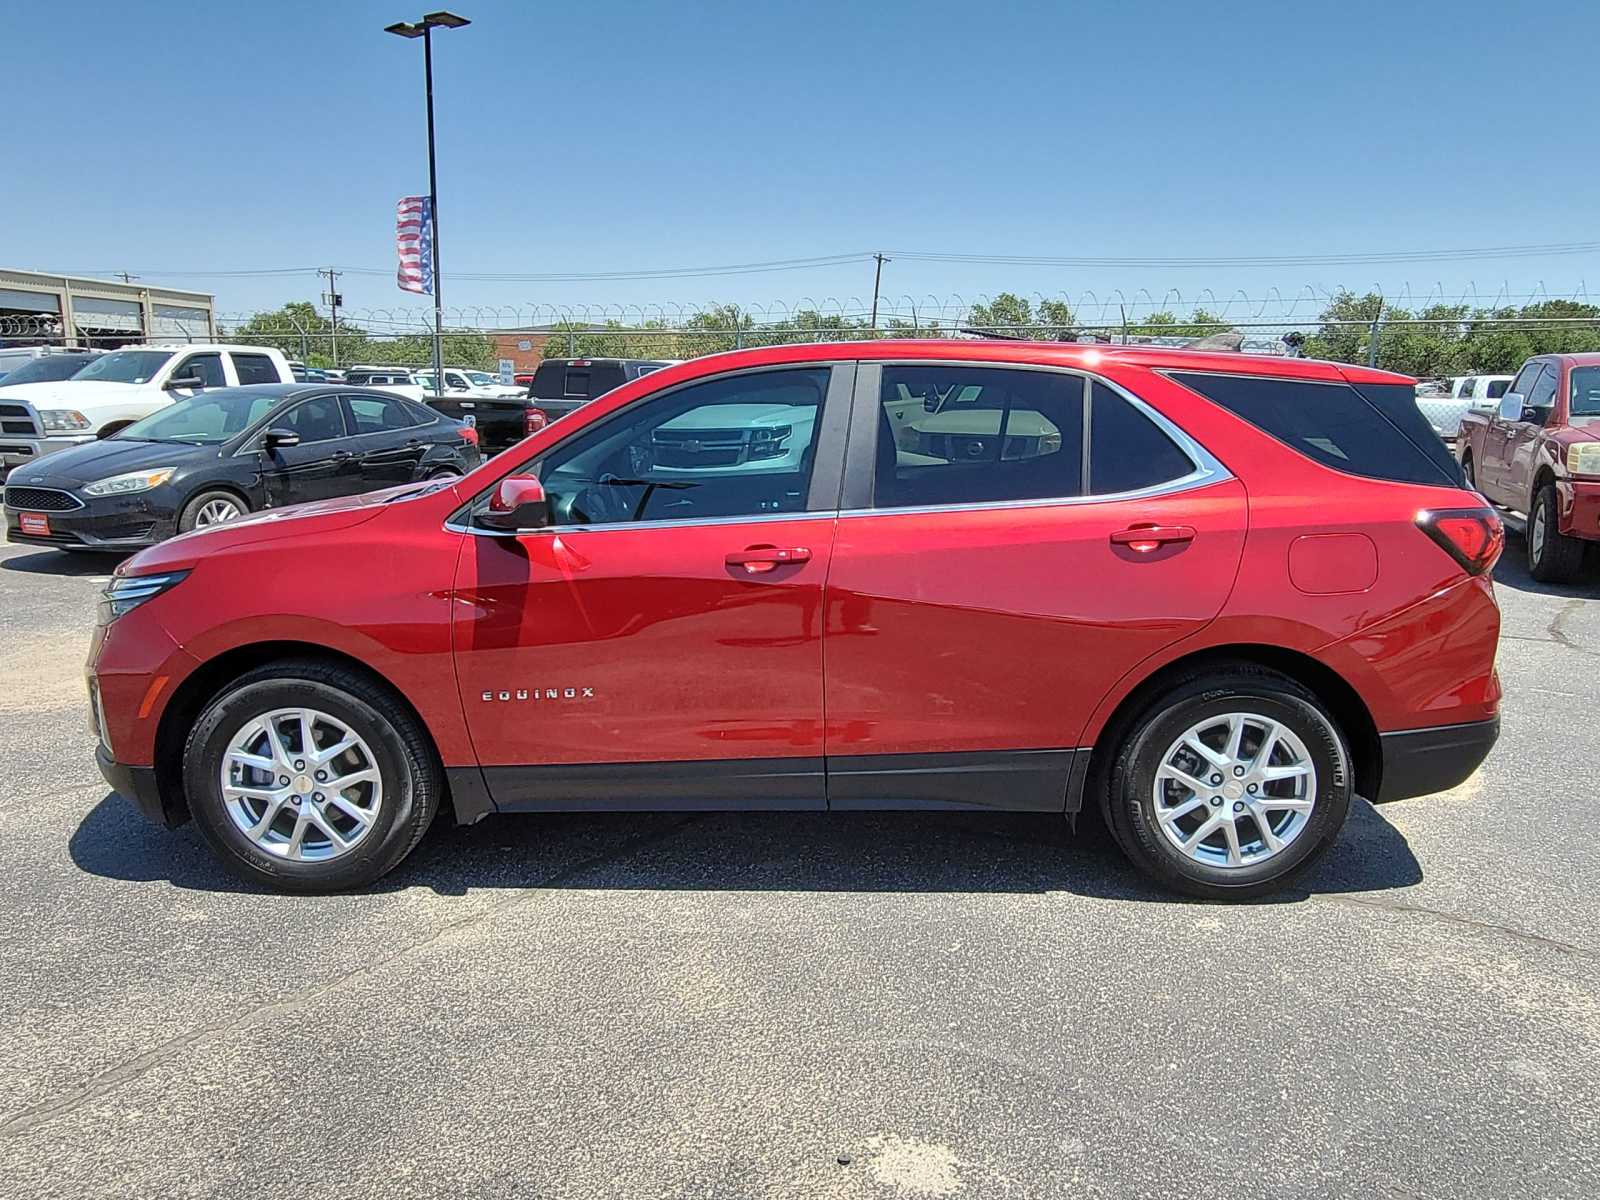 Used 2022 Chevrolet Equinox LT with VIN 3GNAXKEV3NL217012 for sale in Midland, TX